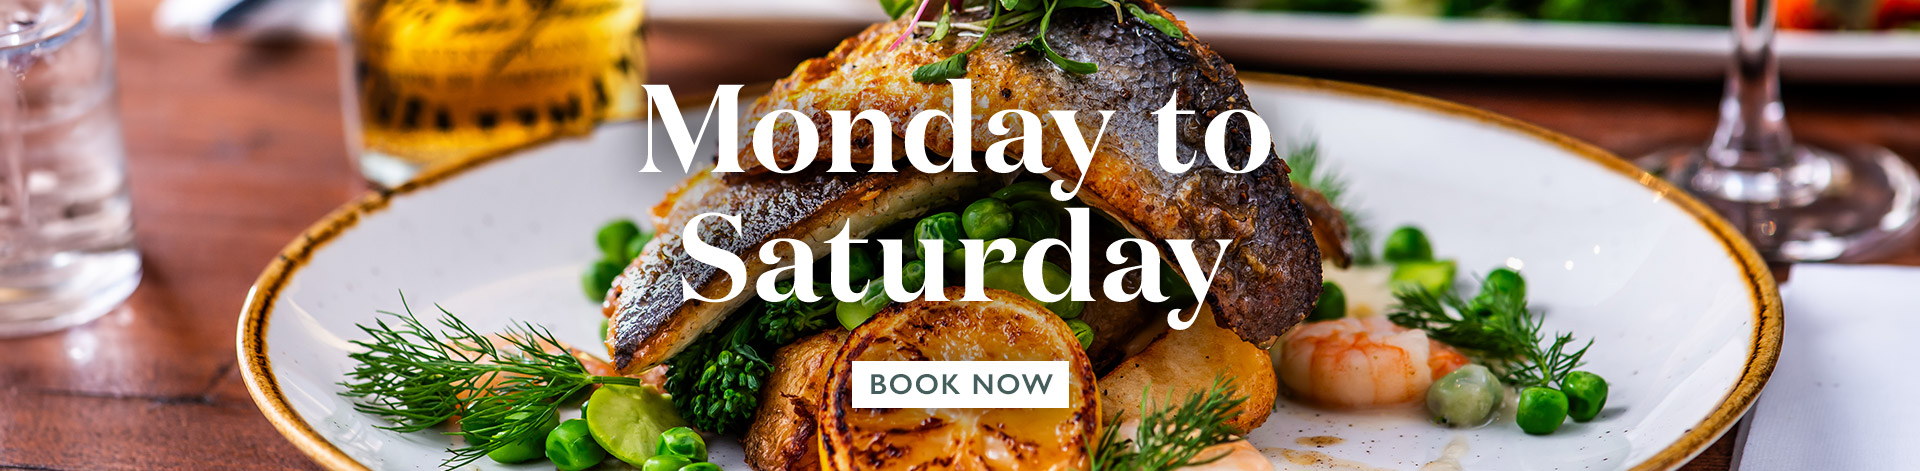 Book now at The Oaken Arms